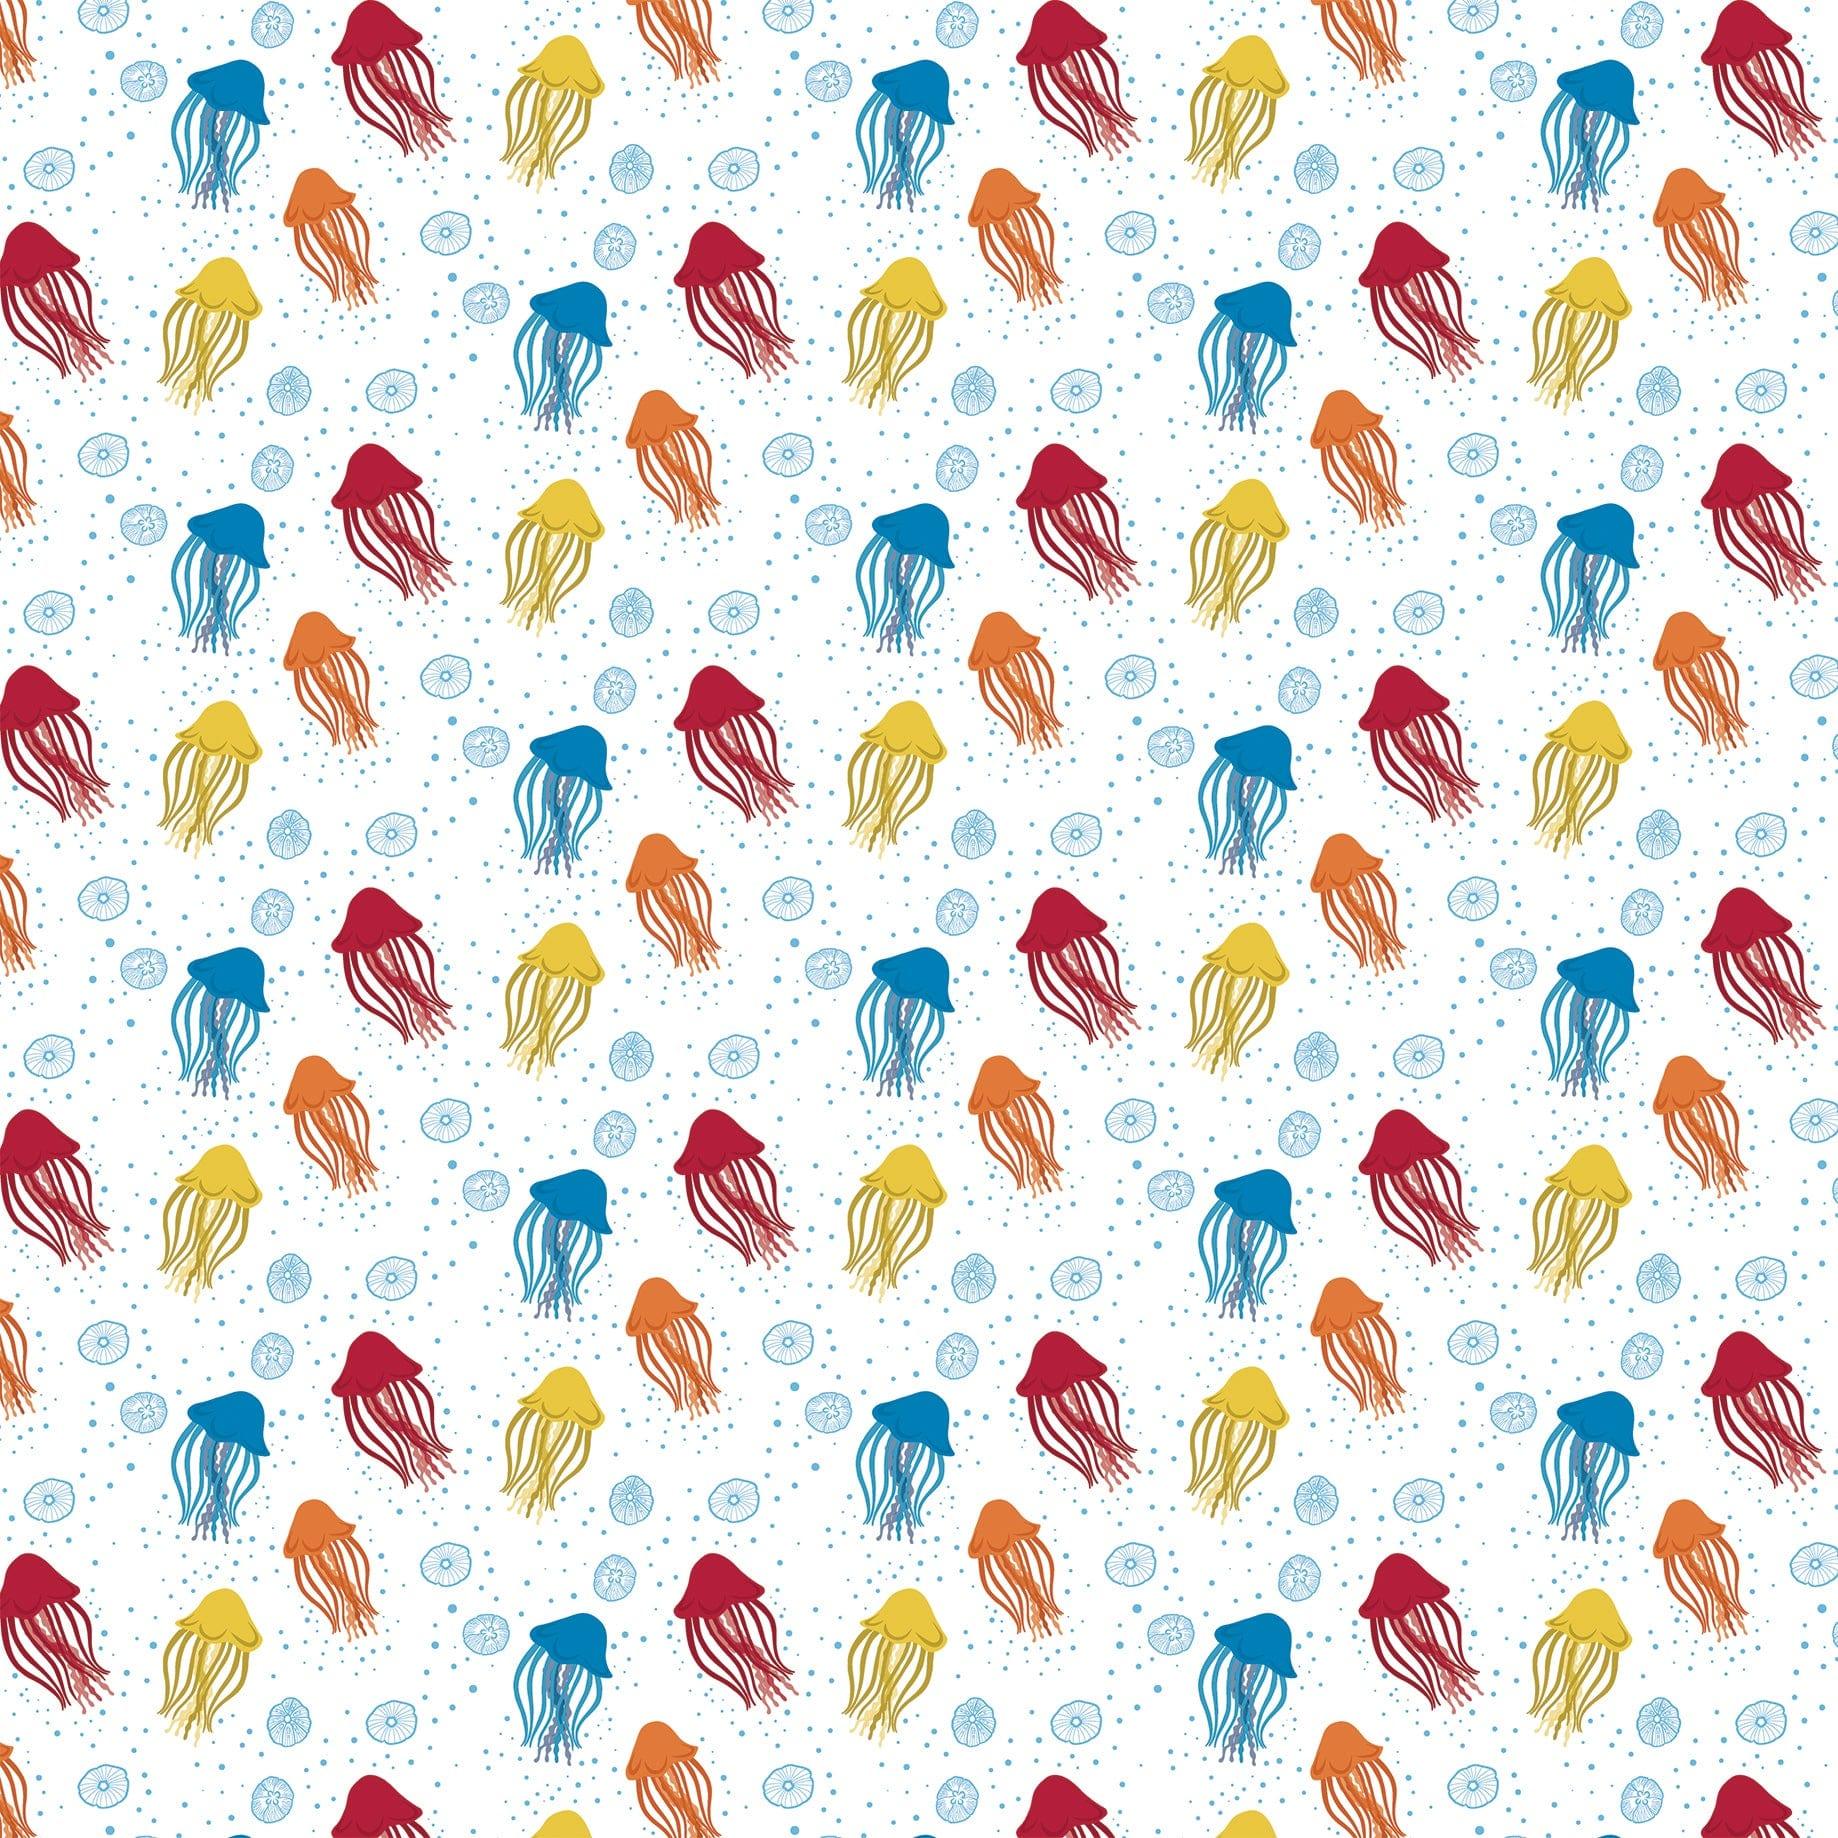 Sea Life Collection Jellyfish 12 x 12 Double-Sided Scrapbook Paper by Echo Park Paper - Scrapbook Supply Companies